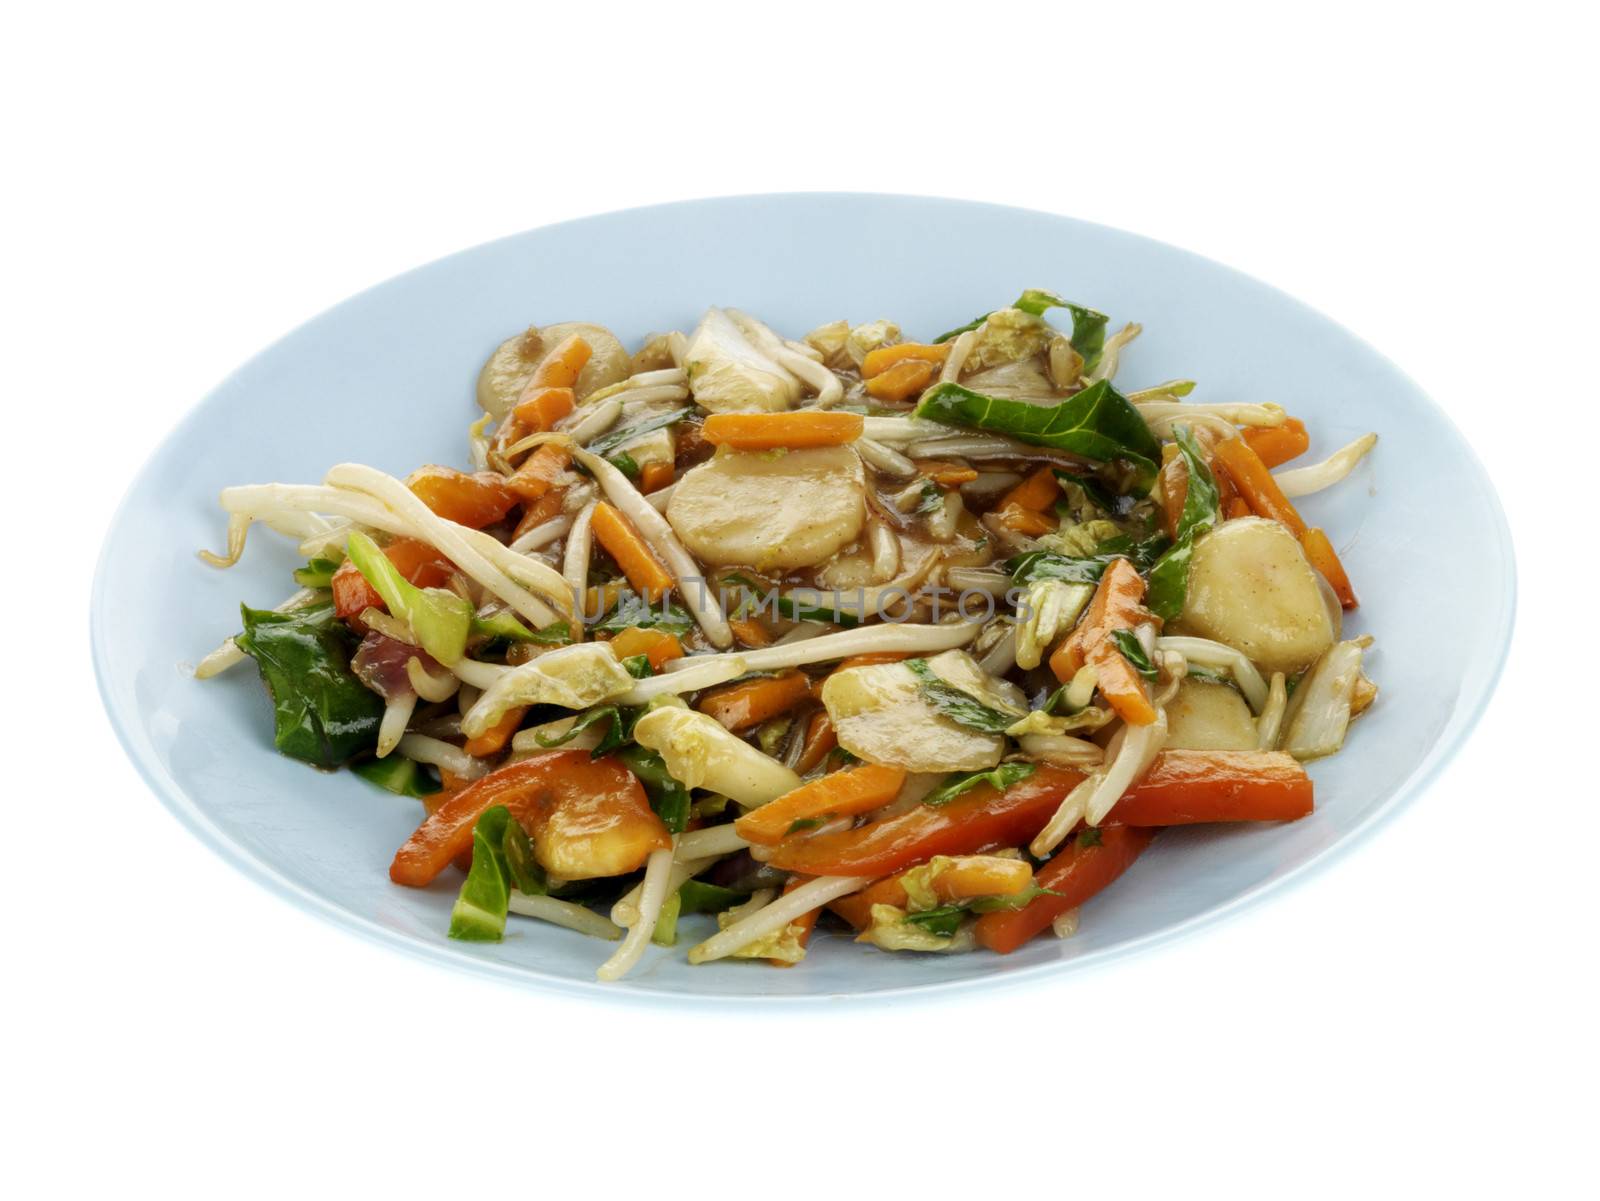 Stirfry Vegetables in Chow Mein Sauce by Whiteboxmedia